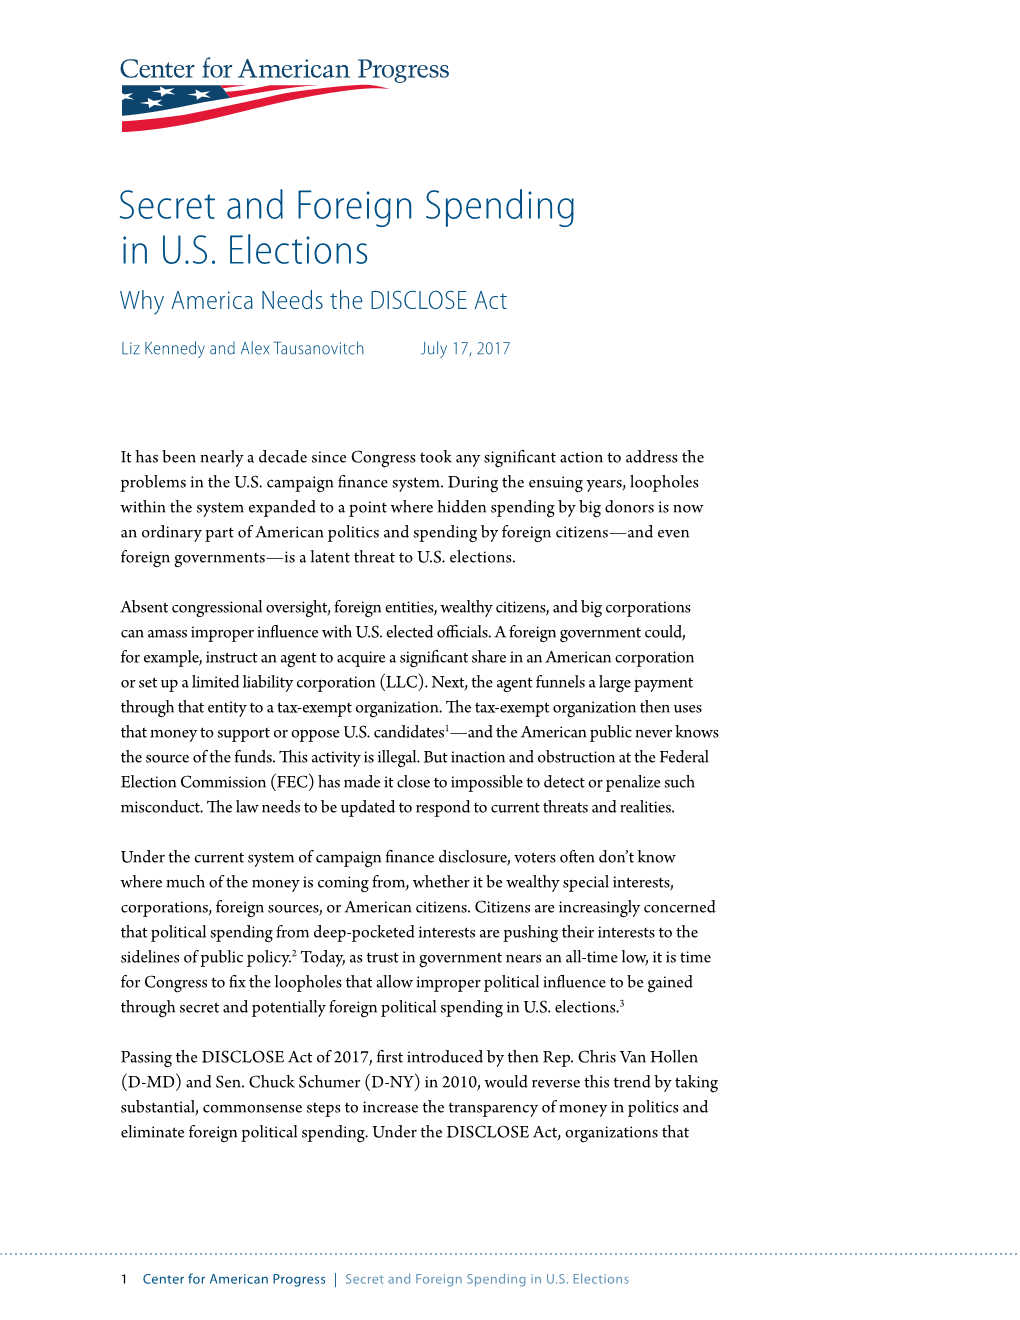 Secret and Foreign Spending in US Elections